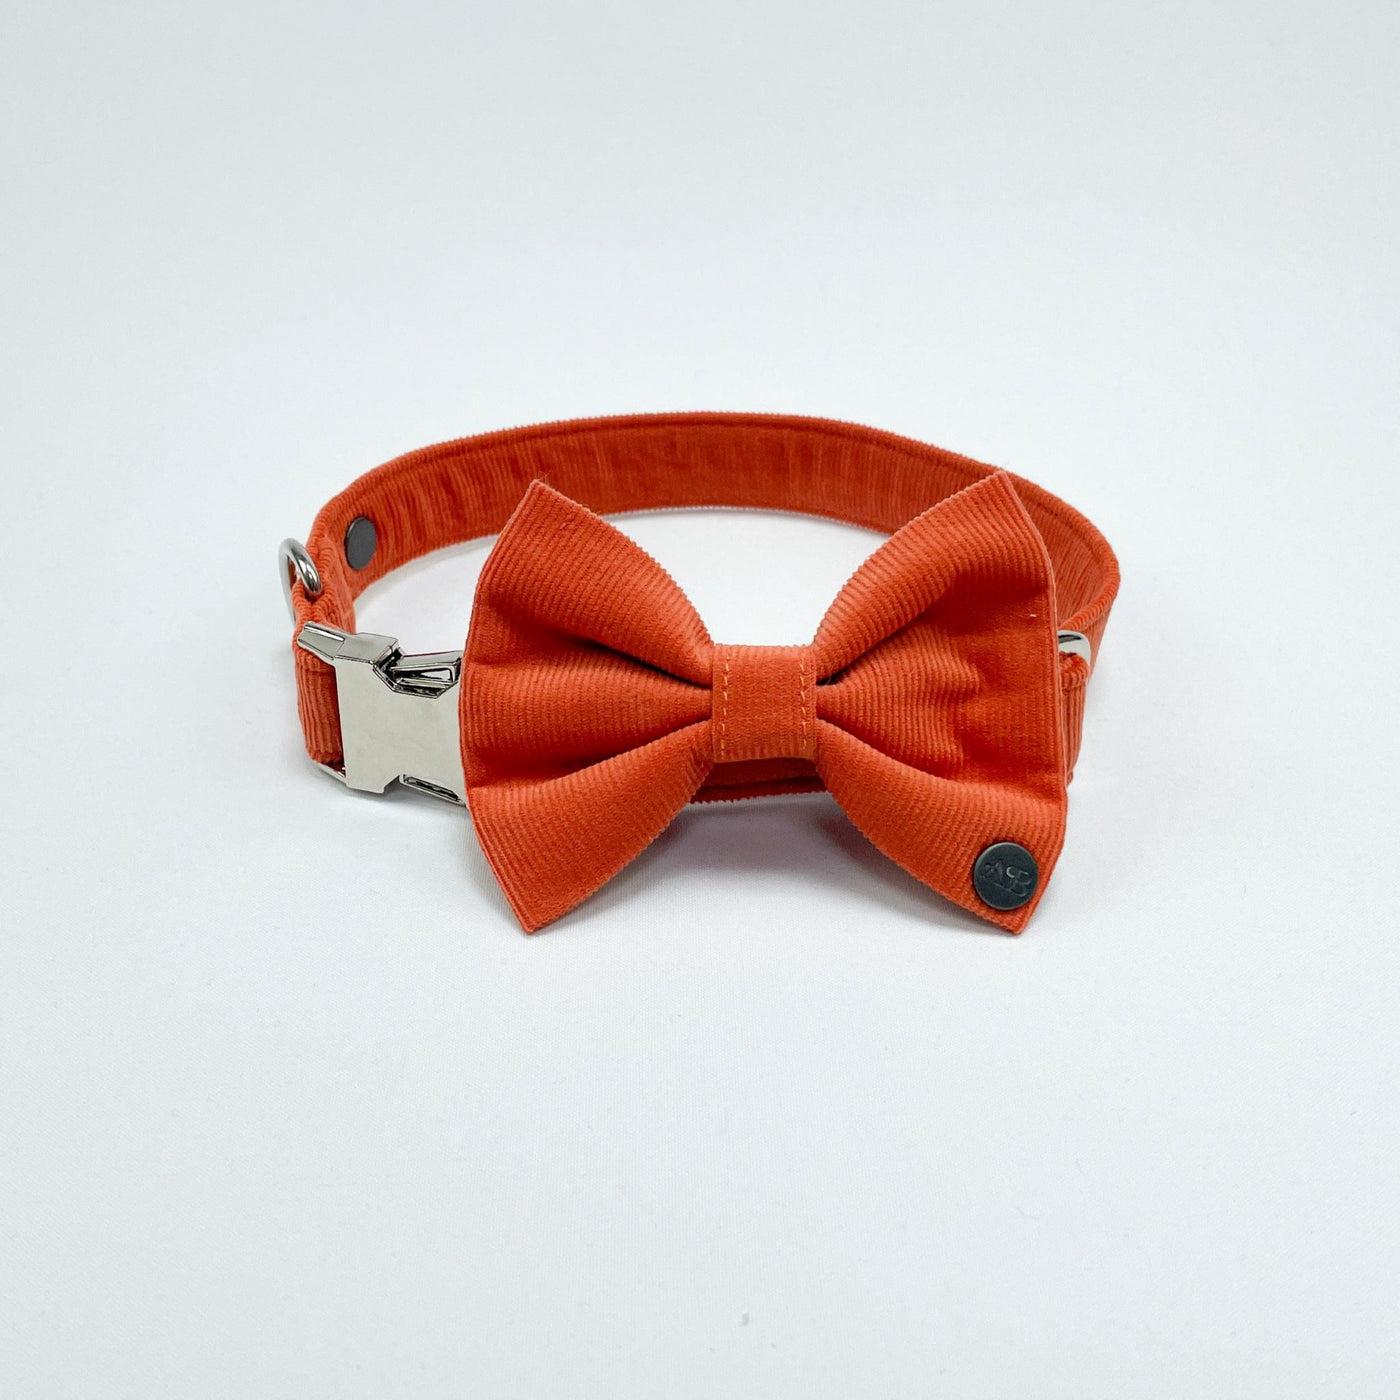 Orange Corduroy Dog Collar shown with matching dickie bow.